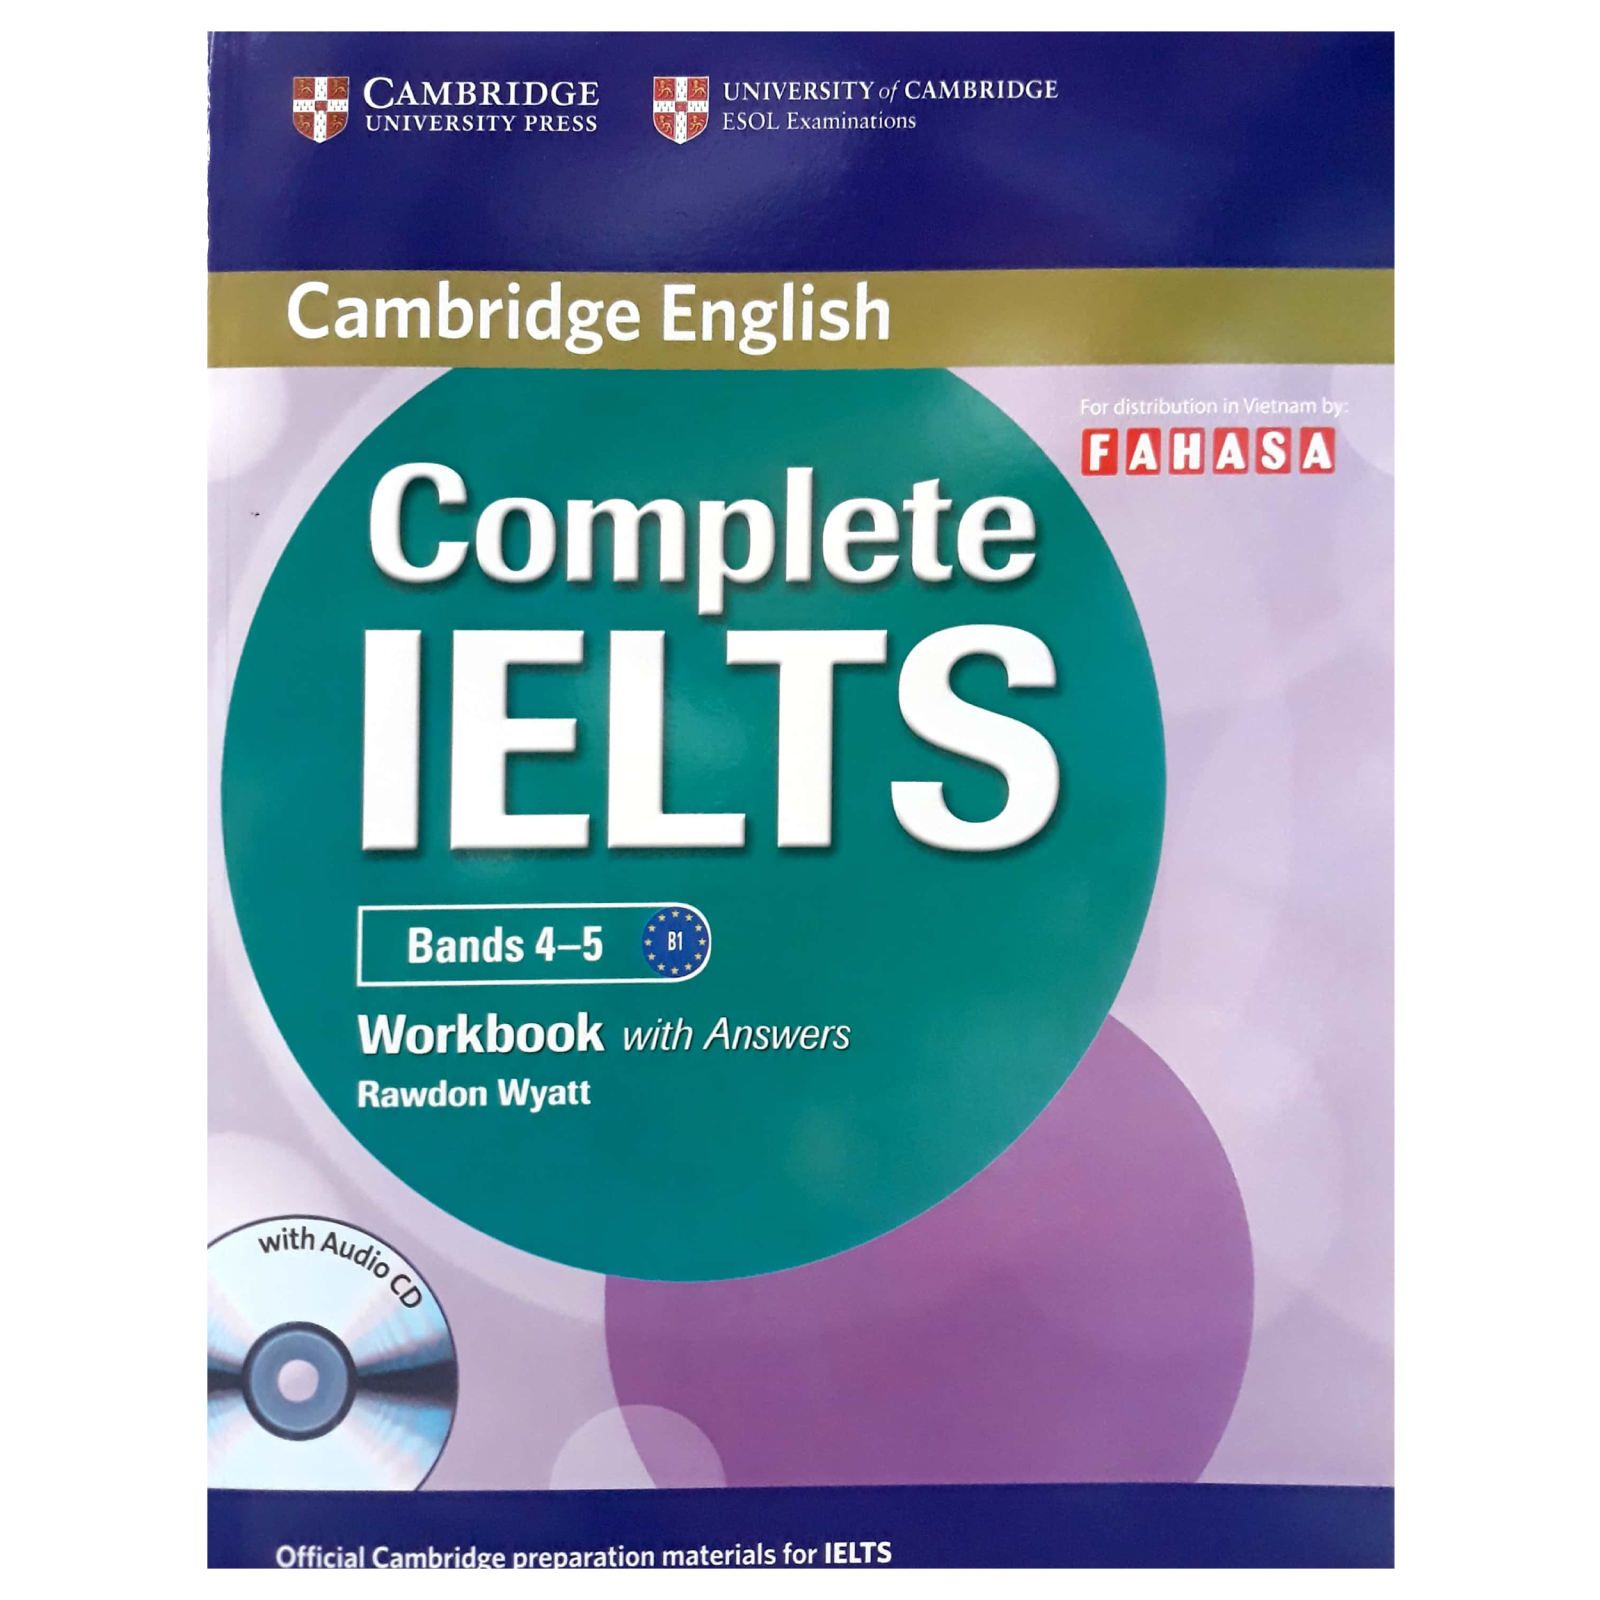 Complete first answers. Cambridge English Grammar for IELTS. IELTS Grammar 6.5. Complete IELTS Bands 6.5-7.5 student's book with answers. Complete IELTS 6.5-7.5 Simenda Jackson Audio.